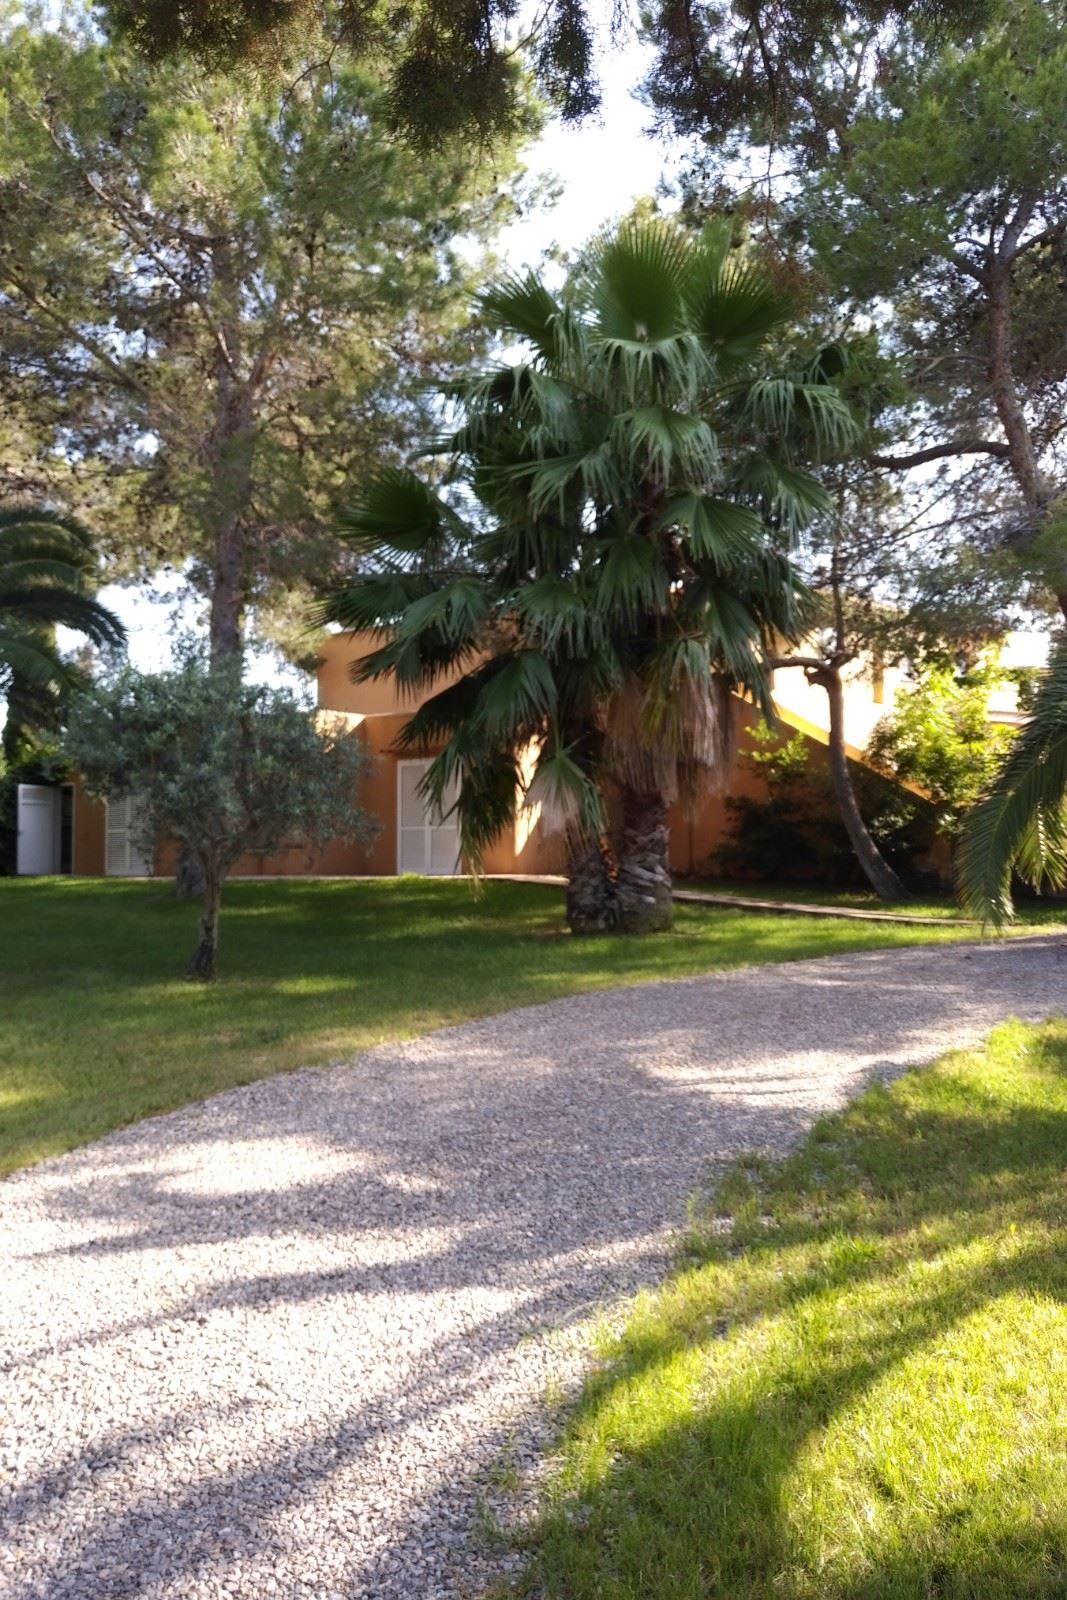 Fantastic villa with guesthouse and large garden walking distance to the beach